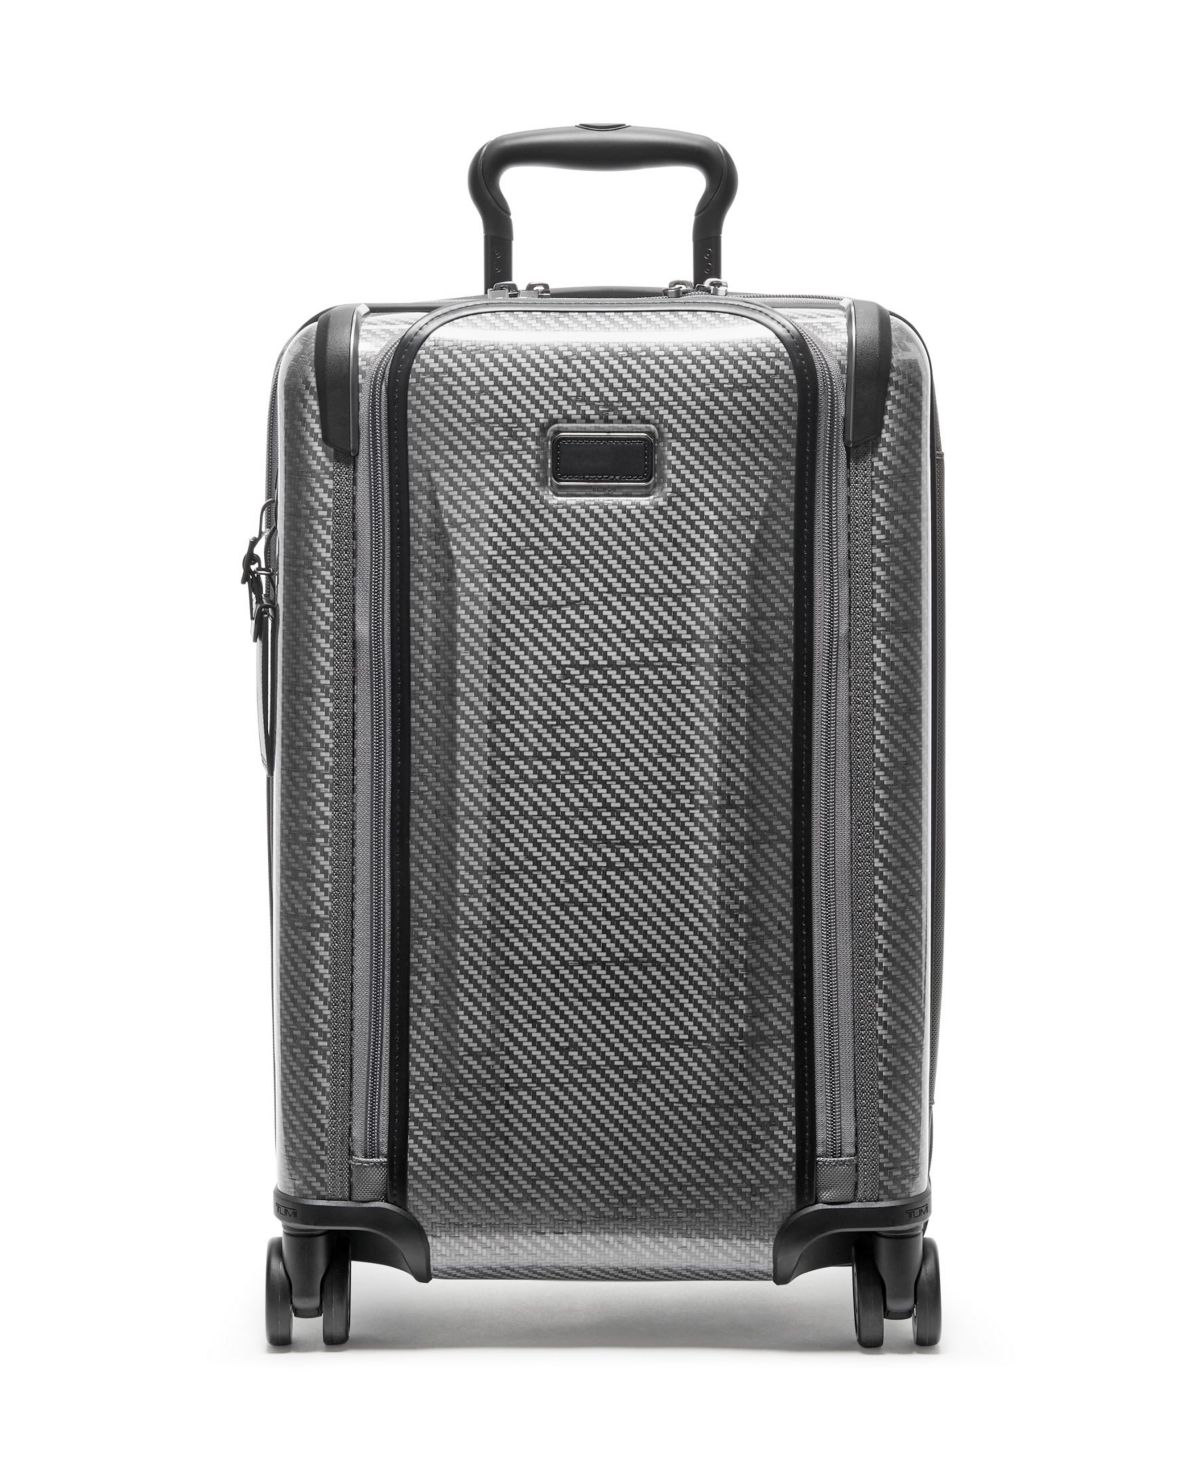 Tumi Tegra Lite 21.75" International Front Pocket Expandable Carry-on Suitcase In T-graphite